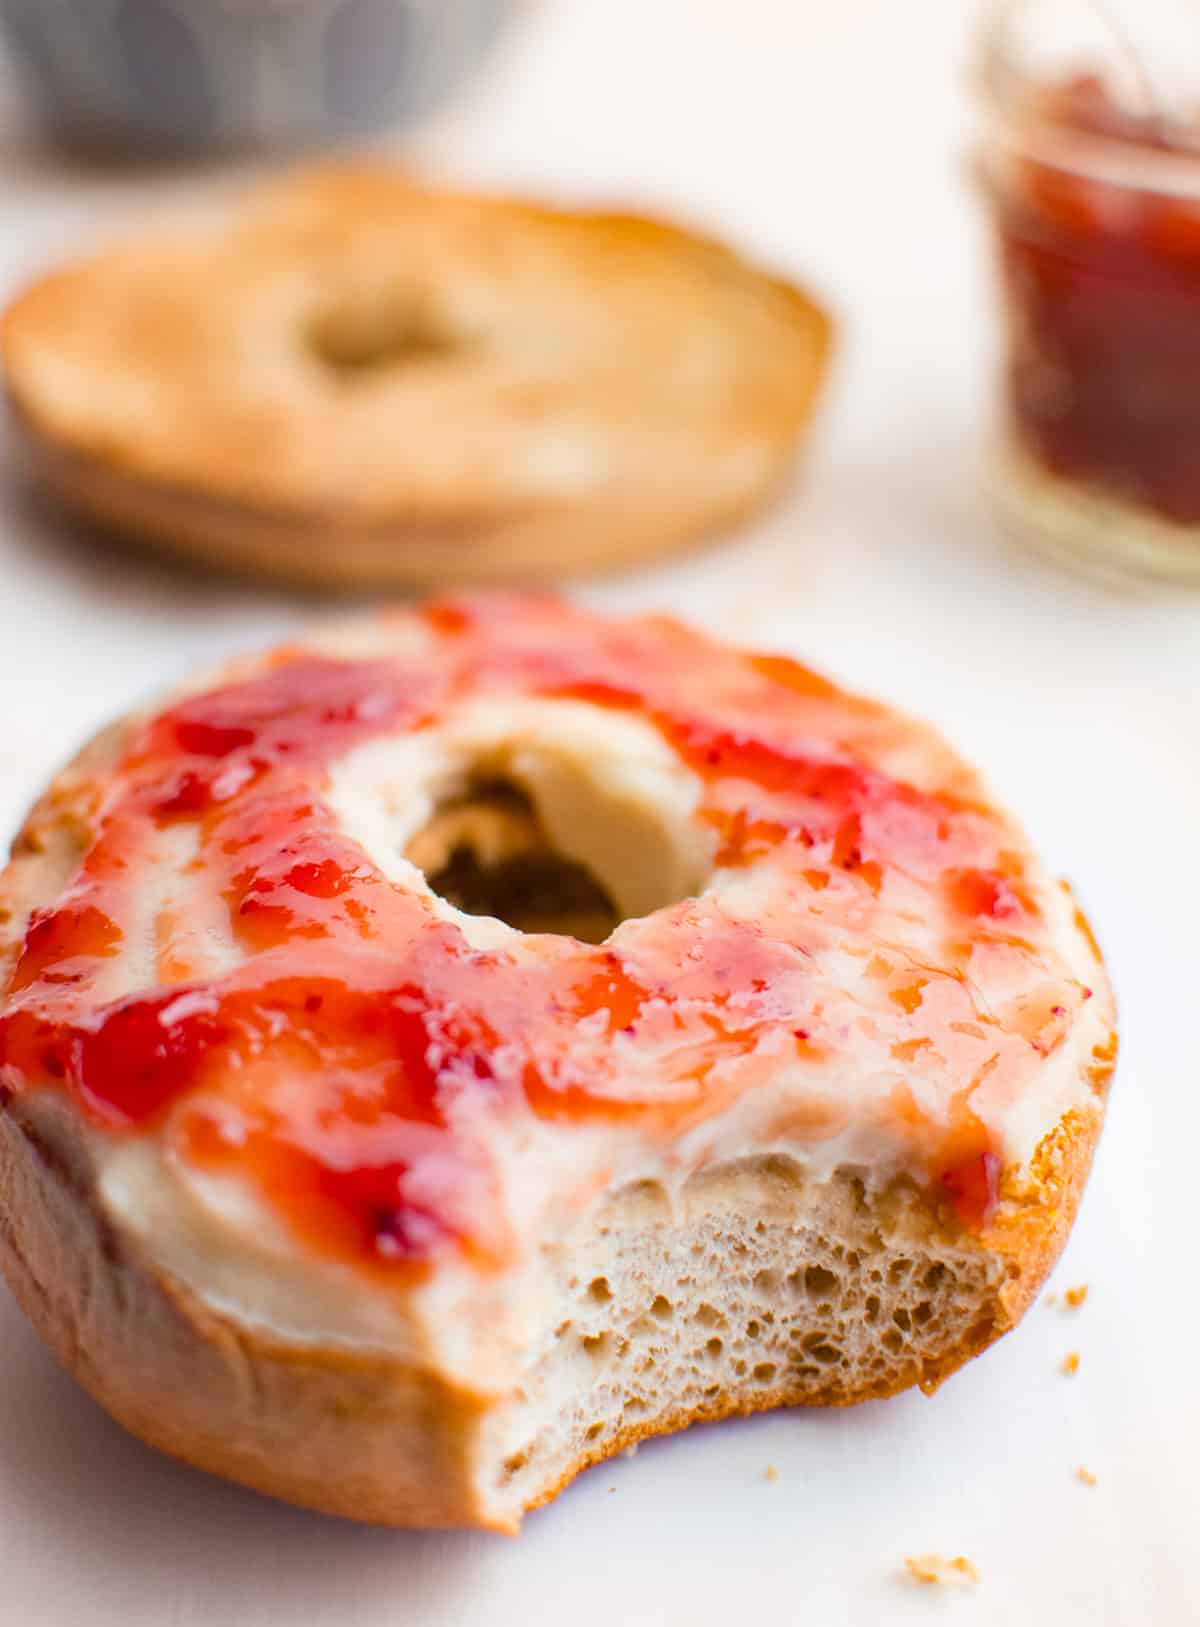 A bite taken out of a toasted bagel spread with cashew cream cheese and strawberry preserves. There is a jar of preserves and other half of toasted bagel in the background.